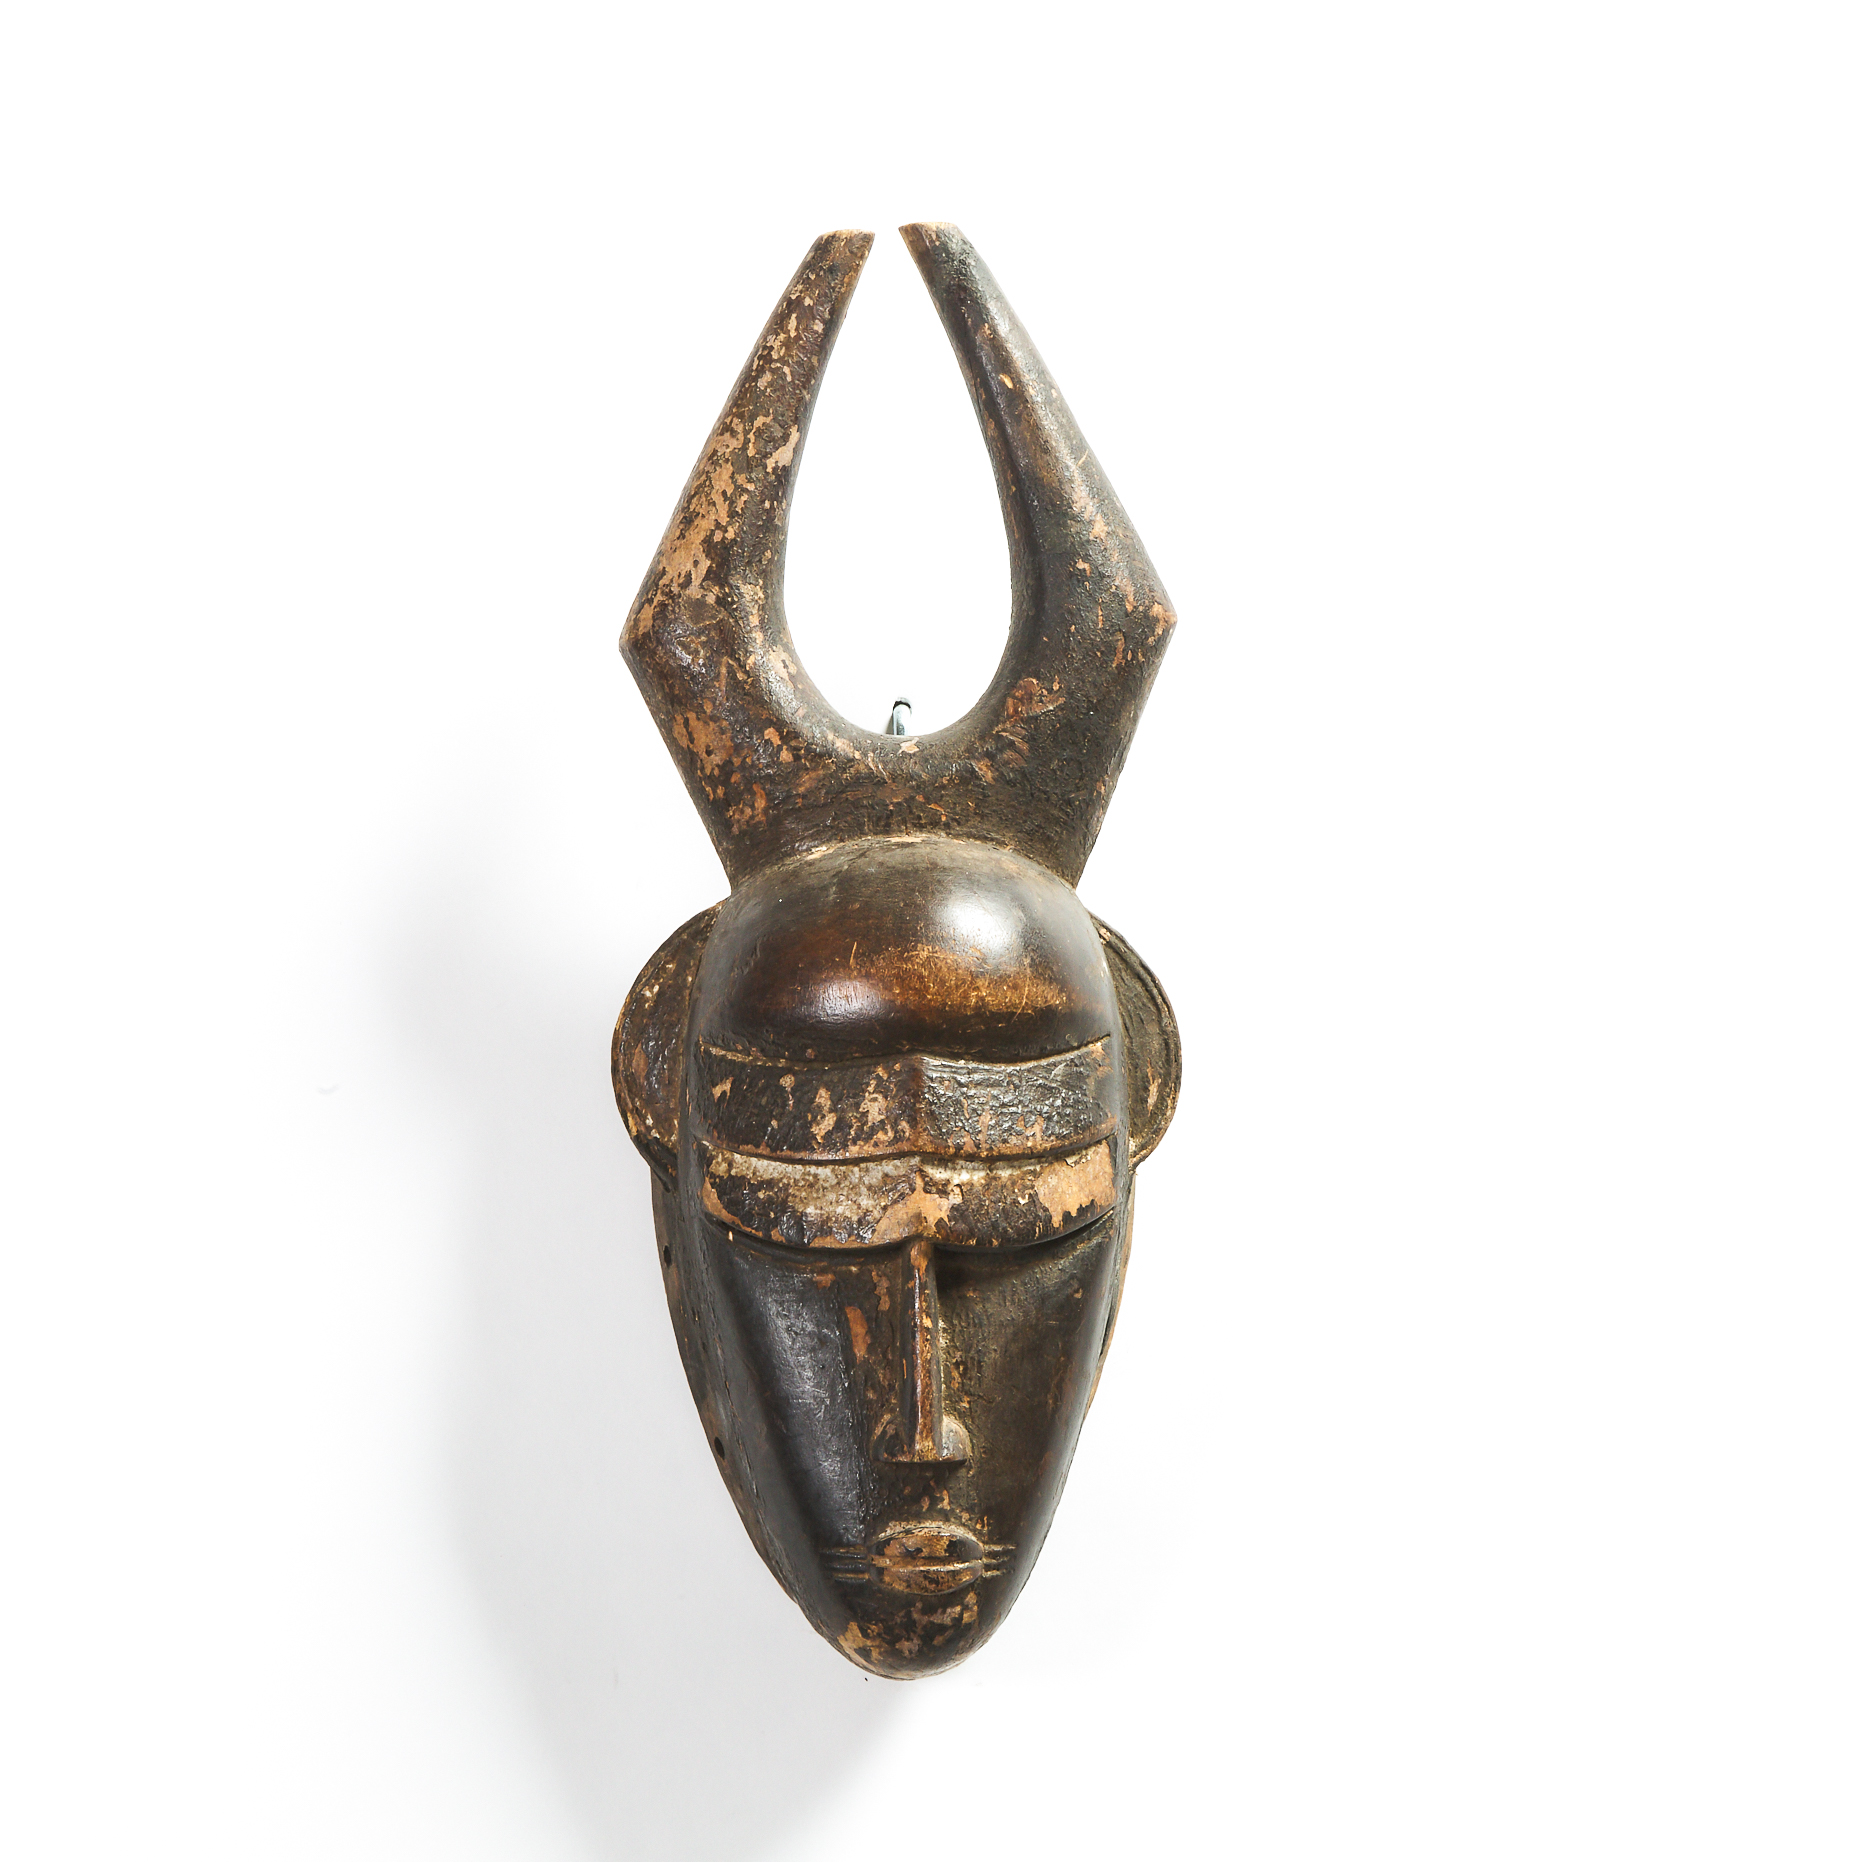 West African Mask, possibly Baule, Yaure or Senufo, mid 20th century